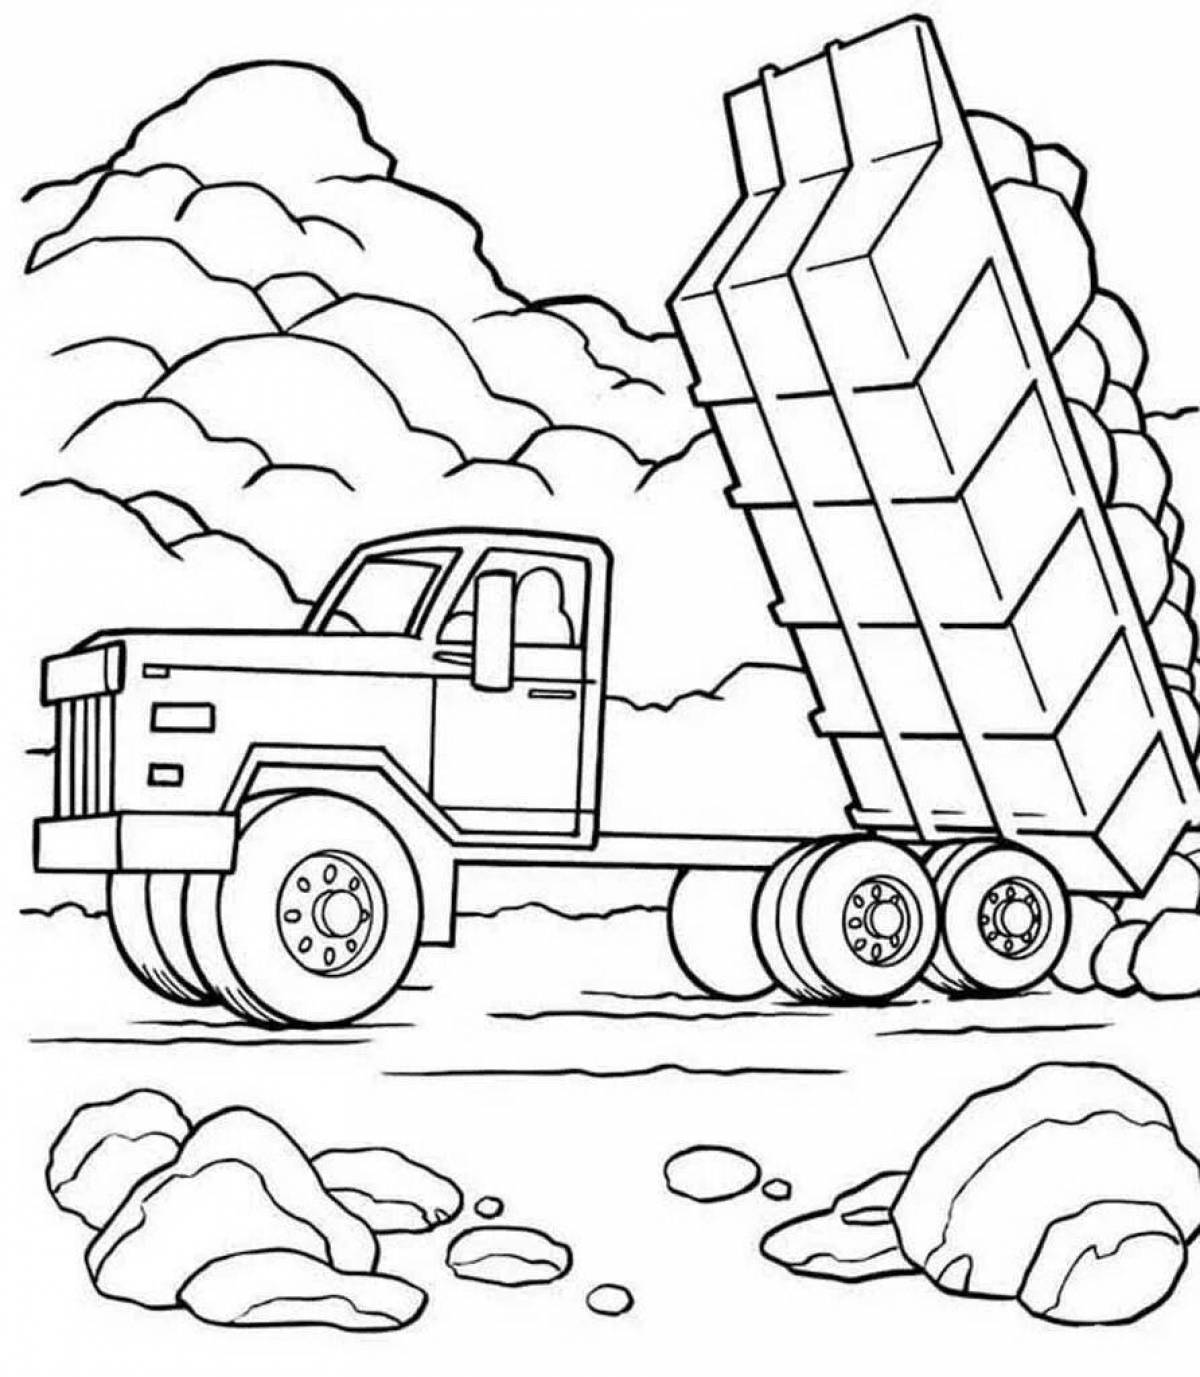 Colorful truck coloring page